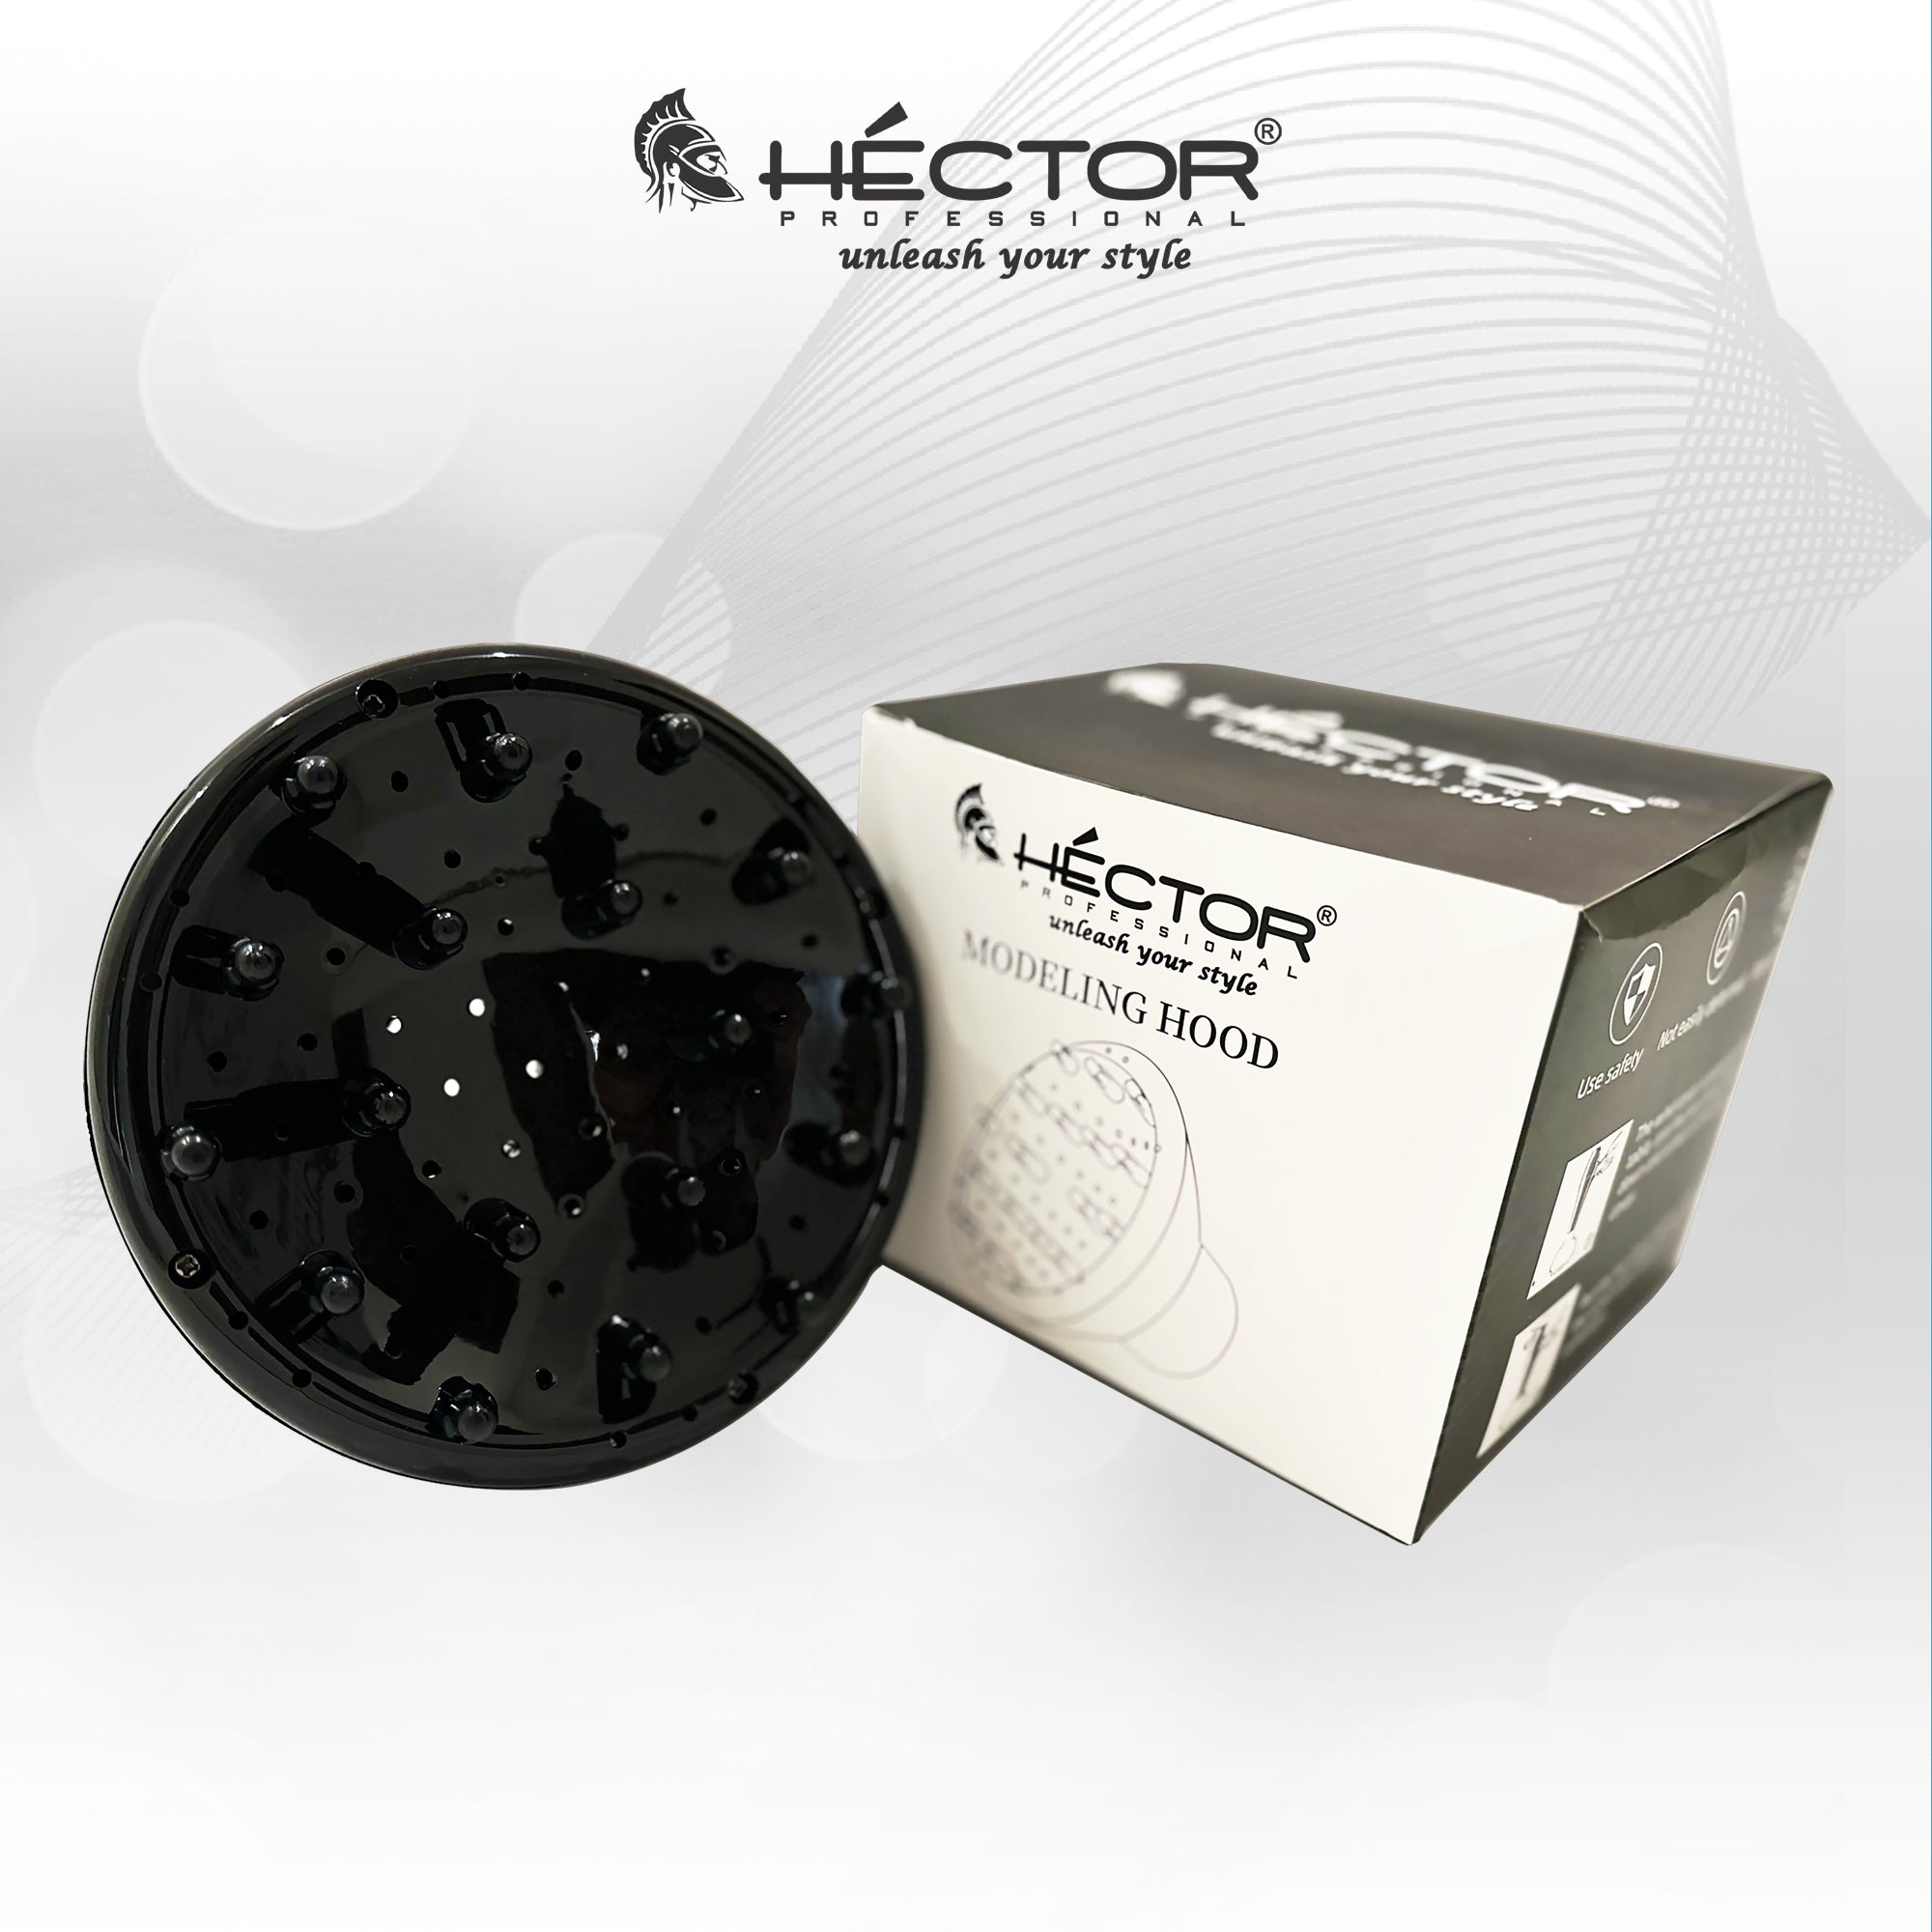 Hector Professional Diffuser for Hair Dryer|Attachment for Curly Wavy Natural Thick Hair to Build Volume|Diffuser for Blow Dryers